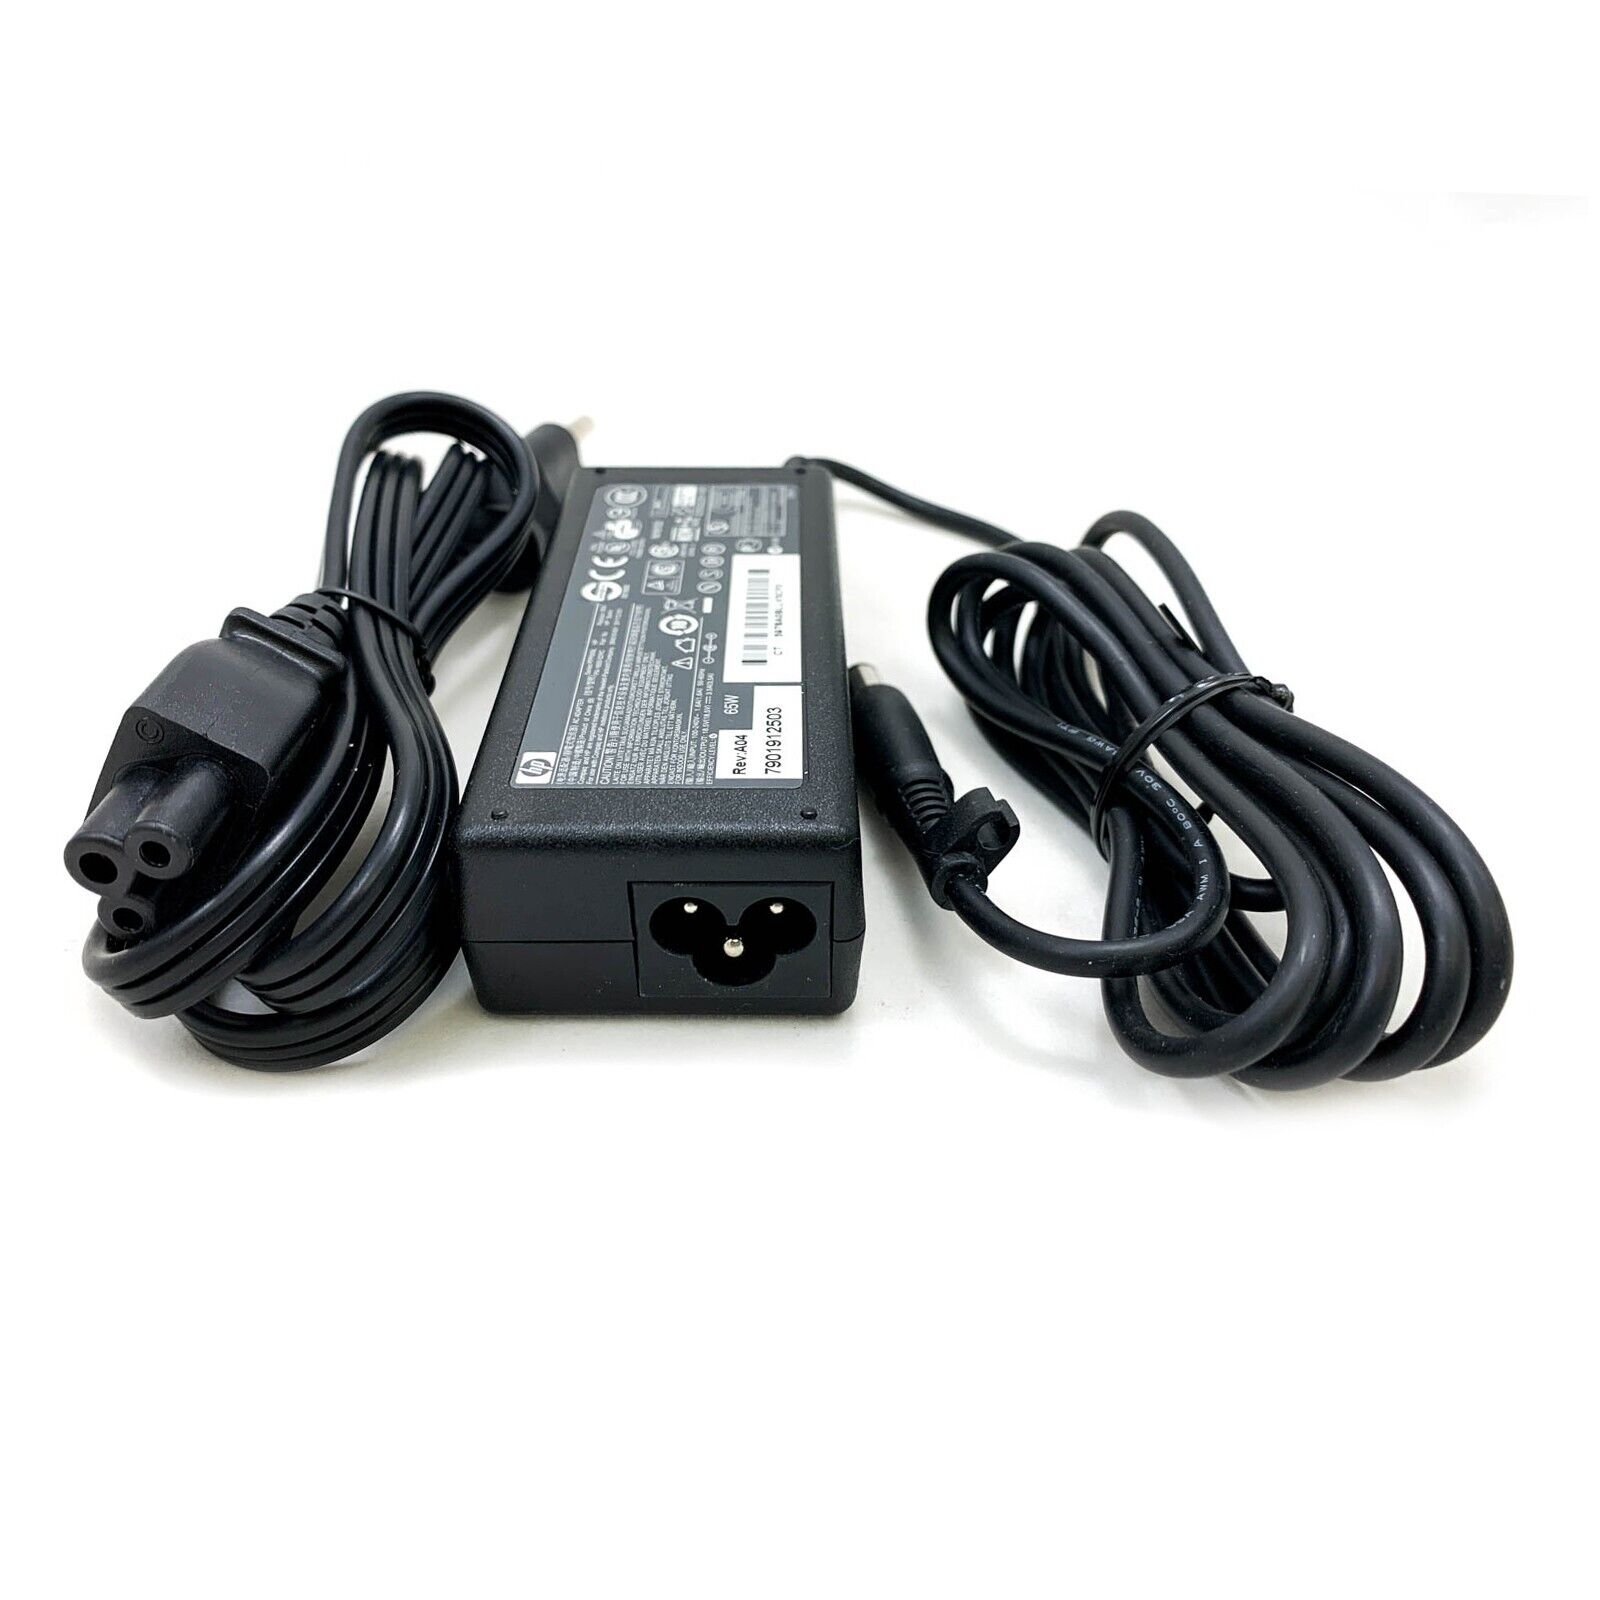 Genuine 65W HP AC DC Power Adapter 18.5V 3.5A Series 463552 519329 OEM Charger